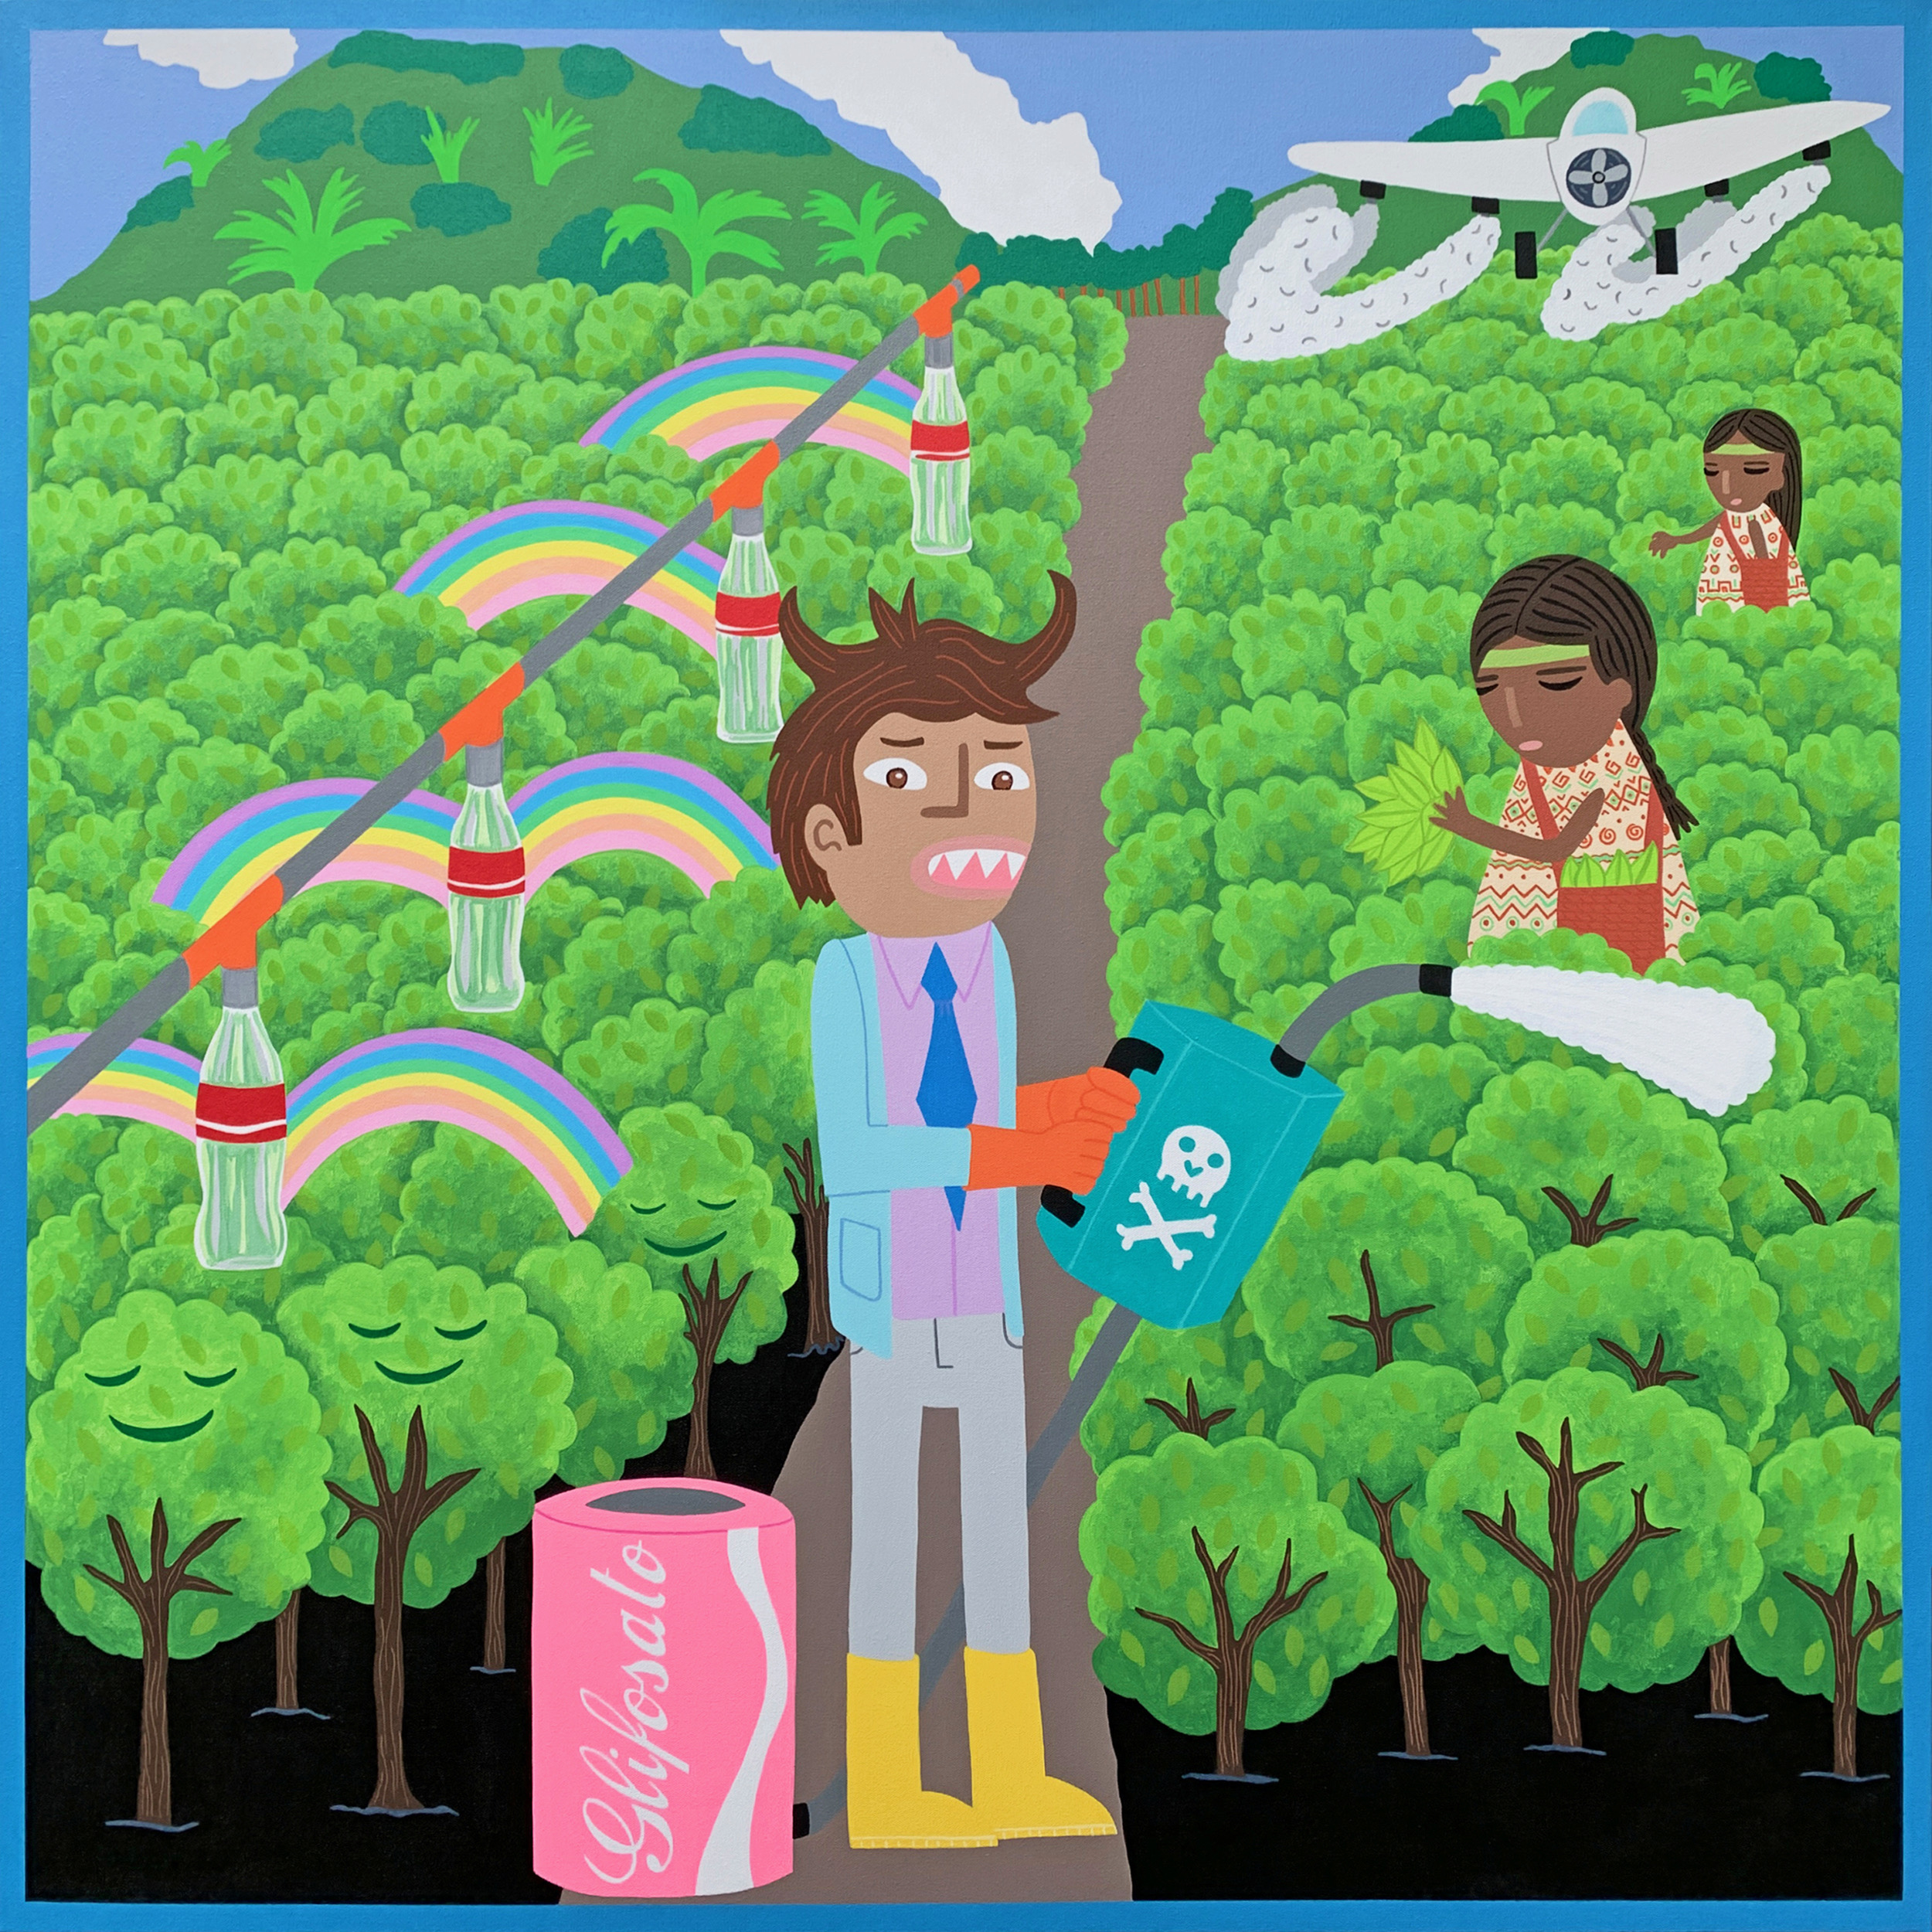 A bright green field of trees with a path down the middle and hills in the background. A cropdusting plane flies above a couple of female workers in the trees. Rainbows and a line of cooke bottles decorate the left side of the canvas. In the middle a man sprays a toxic chemical on the field.